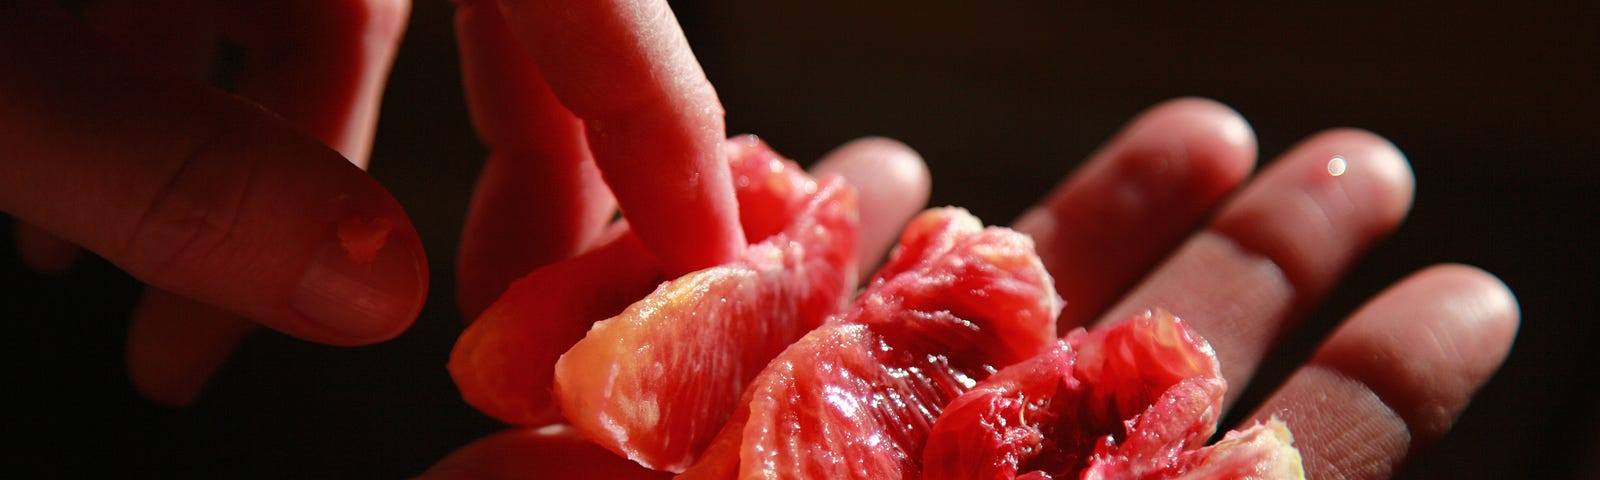 A carelessly sectioned blood-orange, ripped in places, held in one palm while the finger of the other hand prods it.